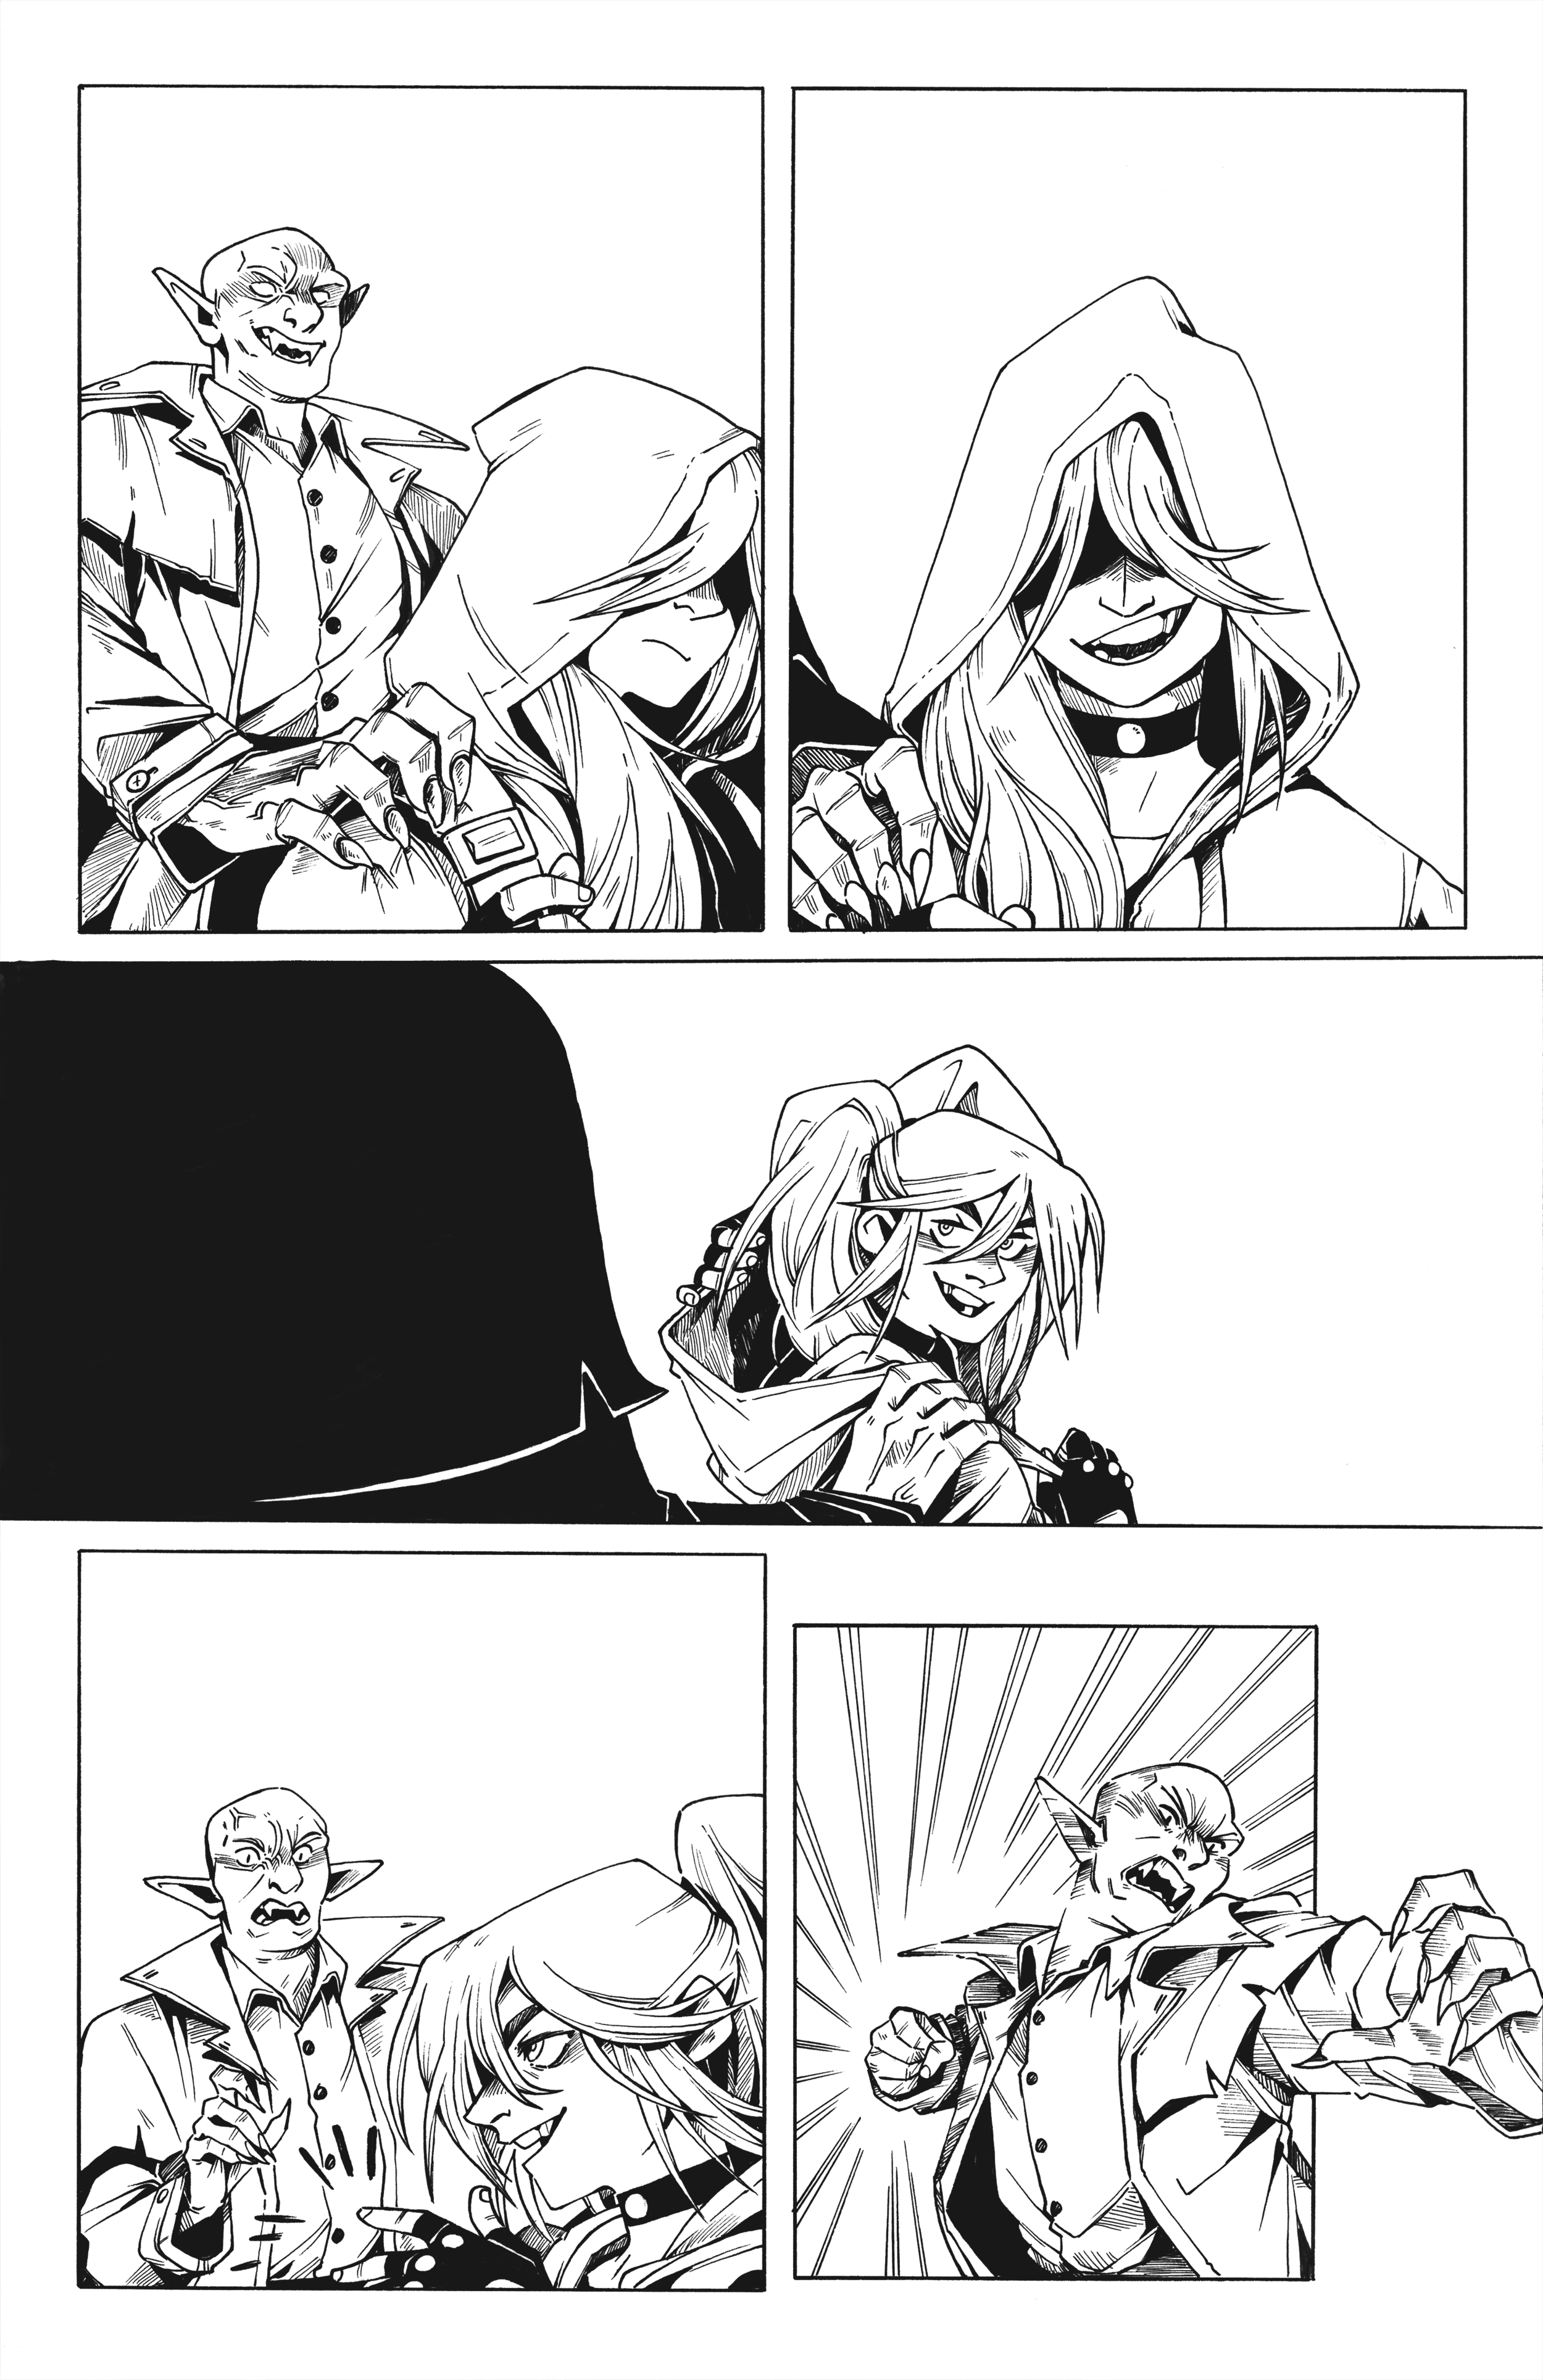 Bill_inks_pg5.png